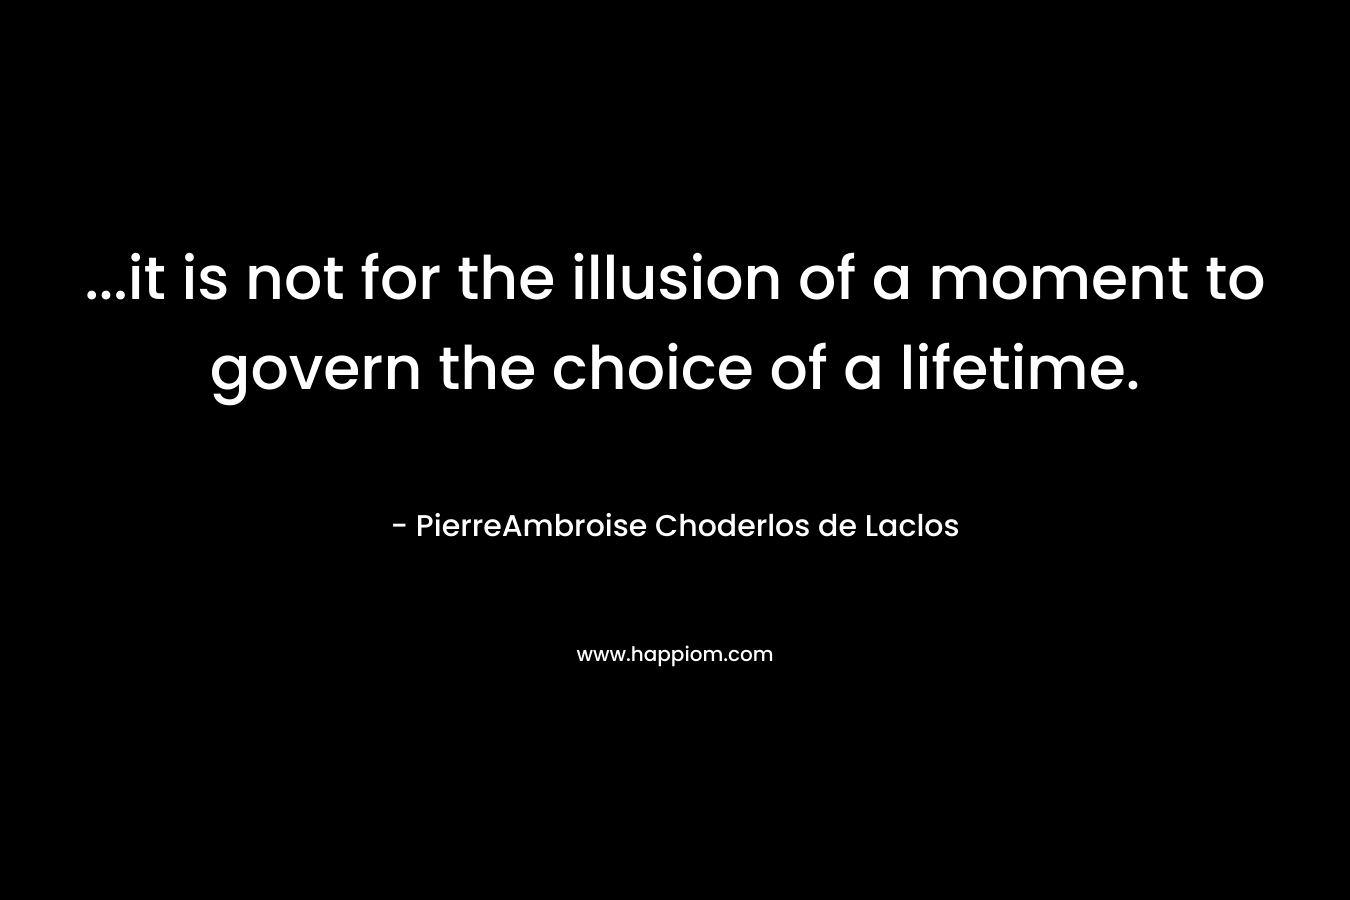 …it is not for the illusion of a moment to govern the choice of a lifetime. – PierreAmbroise Choderlos de Laclos